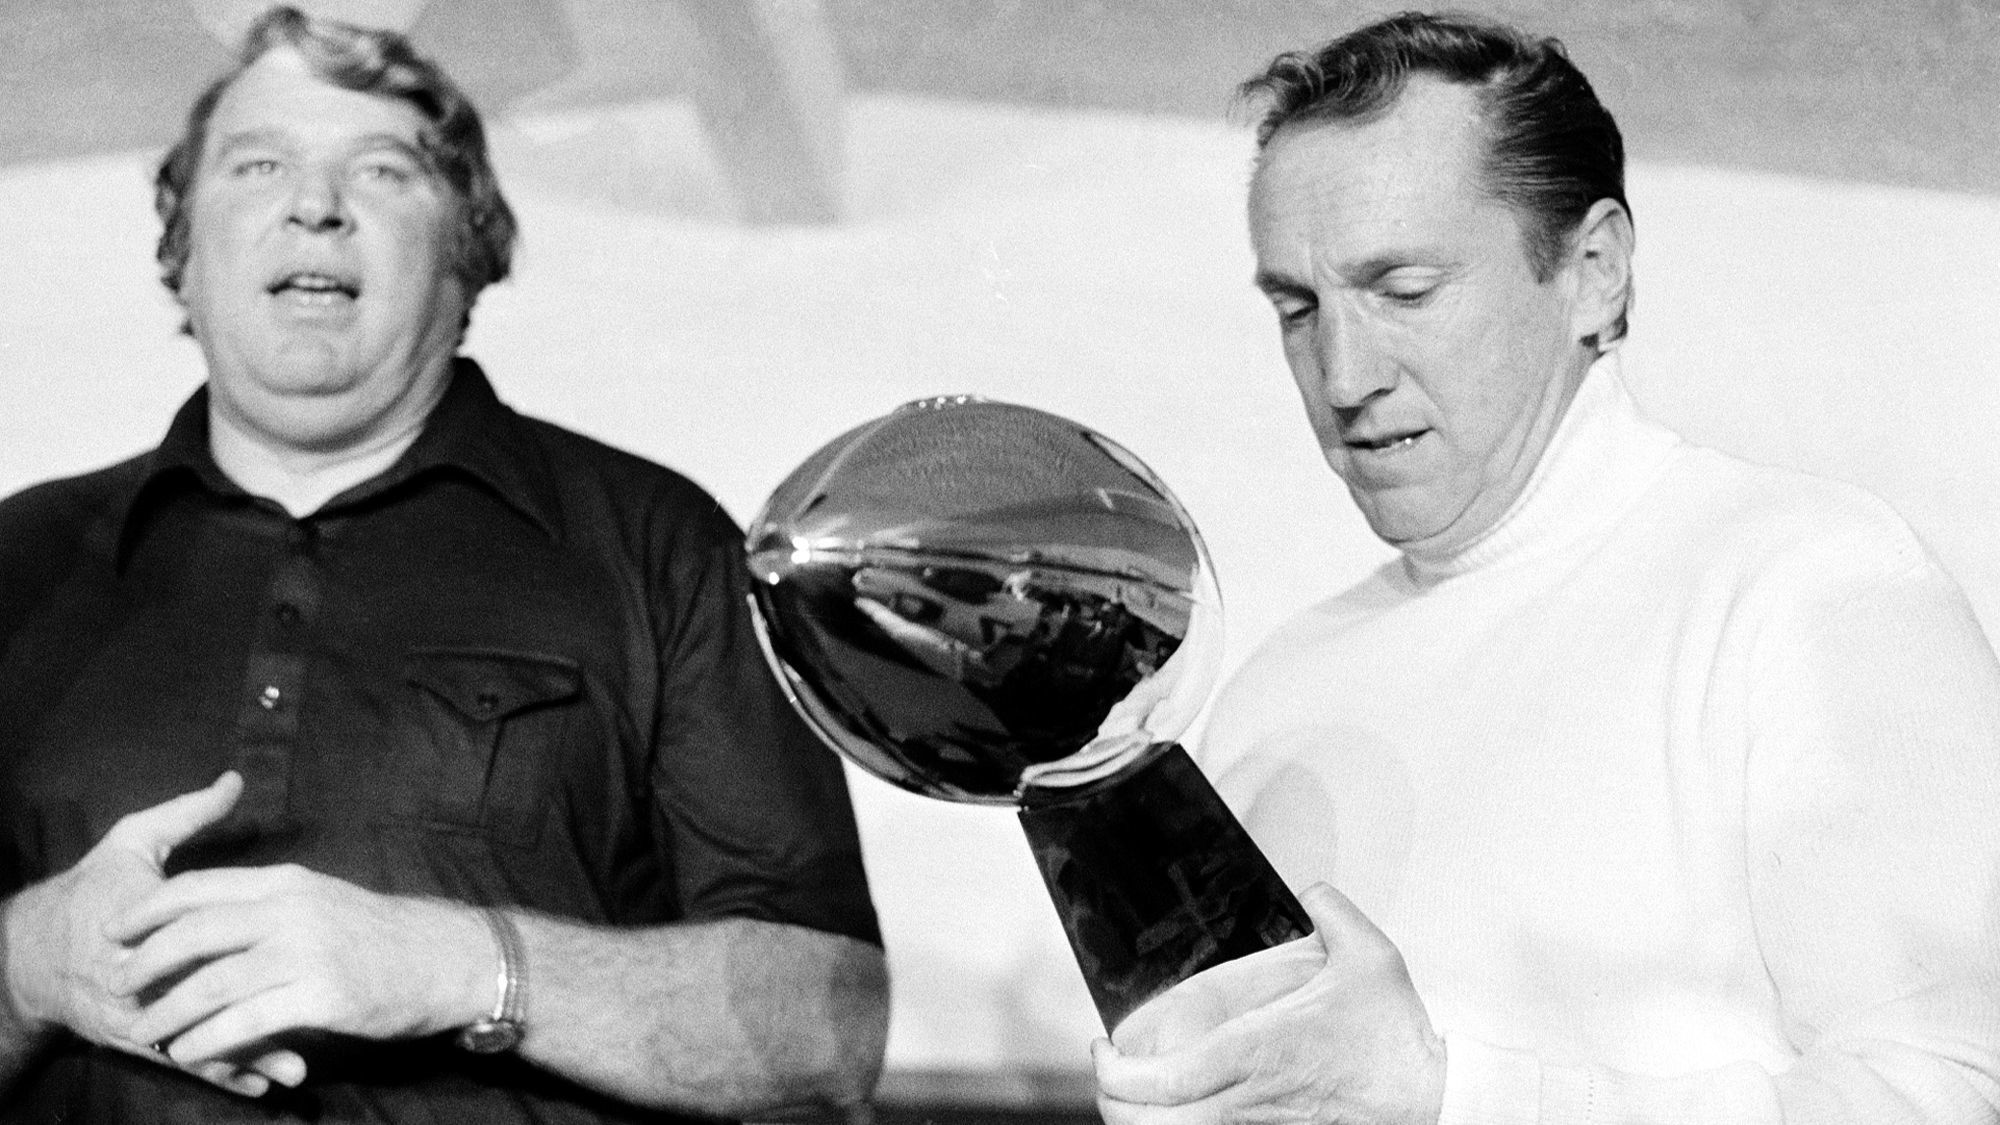 John Madden, left, and Oakland Raiders owner Al Davis talk with the media after winning the Super Bowl in 1977.